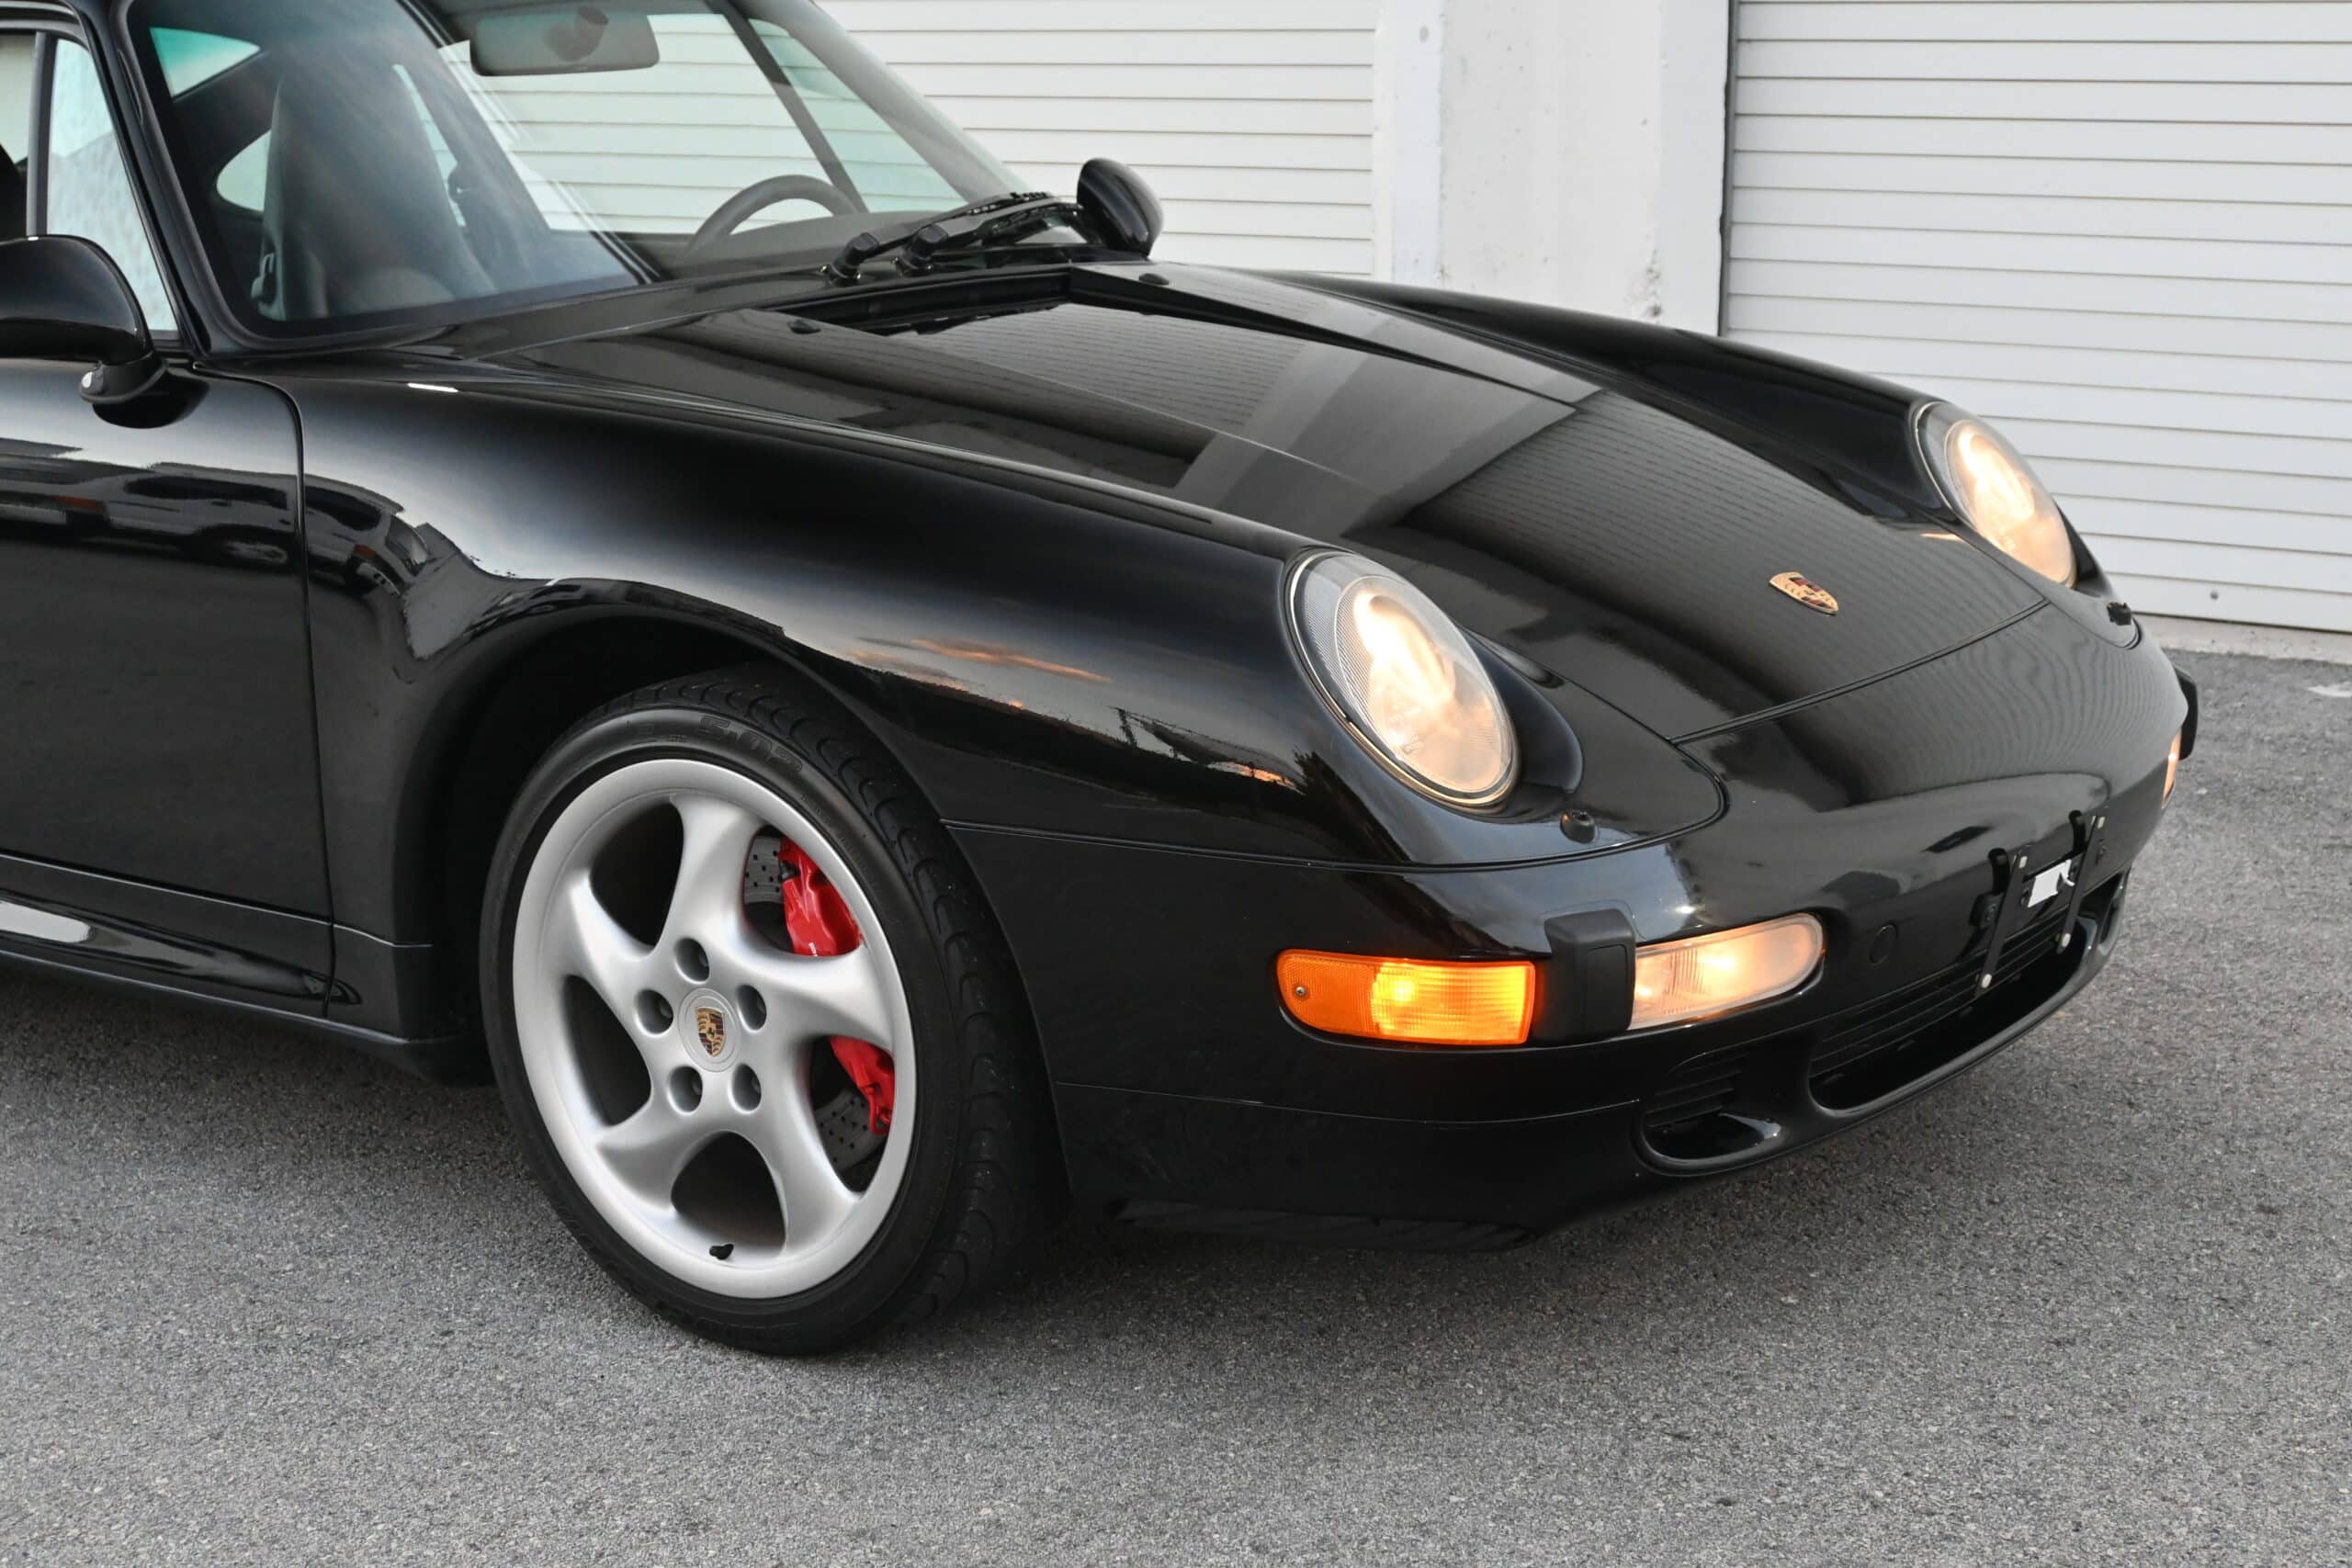 1998 Porsche 911 993 C4S Widebody Only 45k Miles – Carrera 4S -6 Speed Manual – Original All Stock – Like New